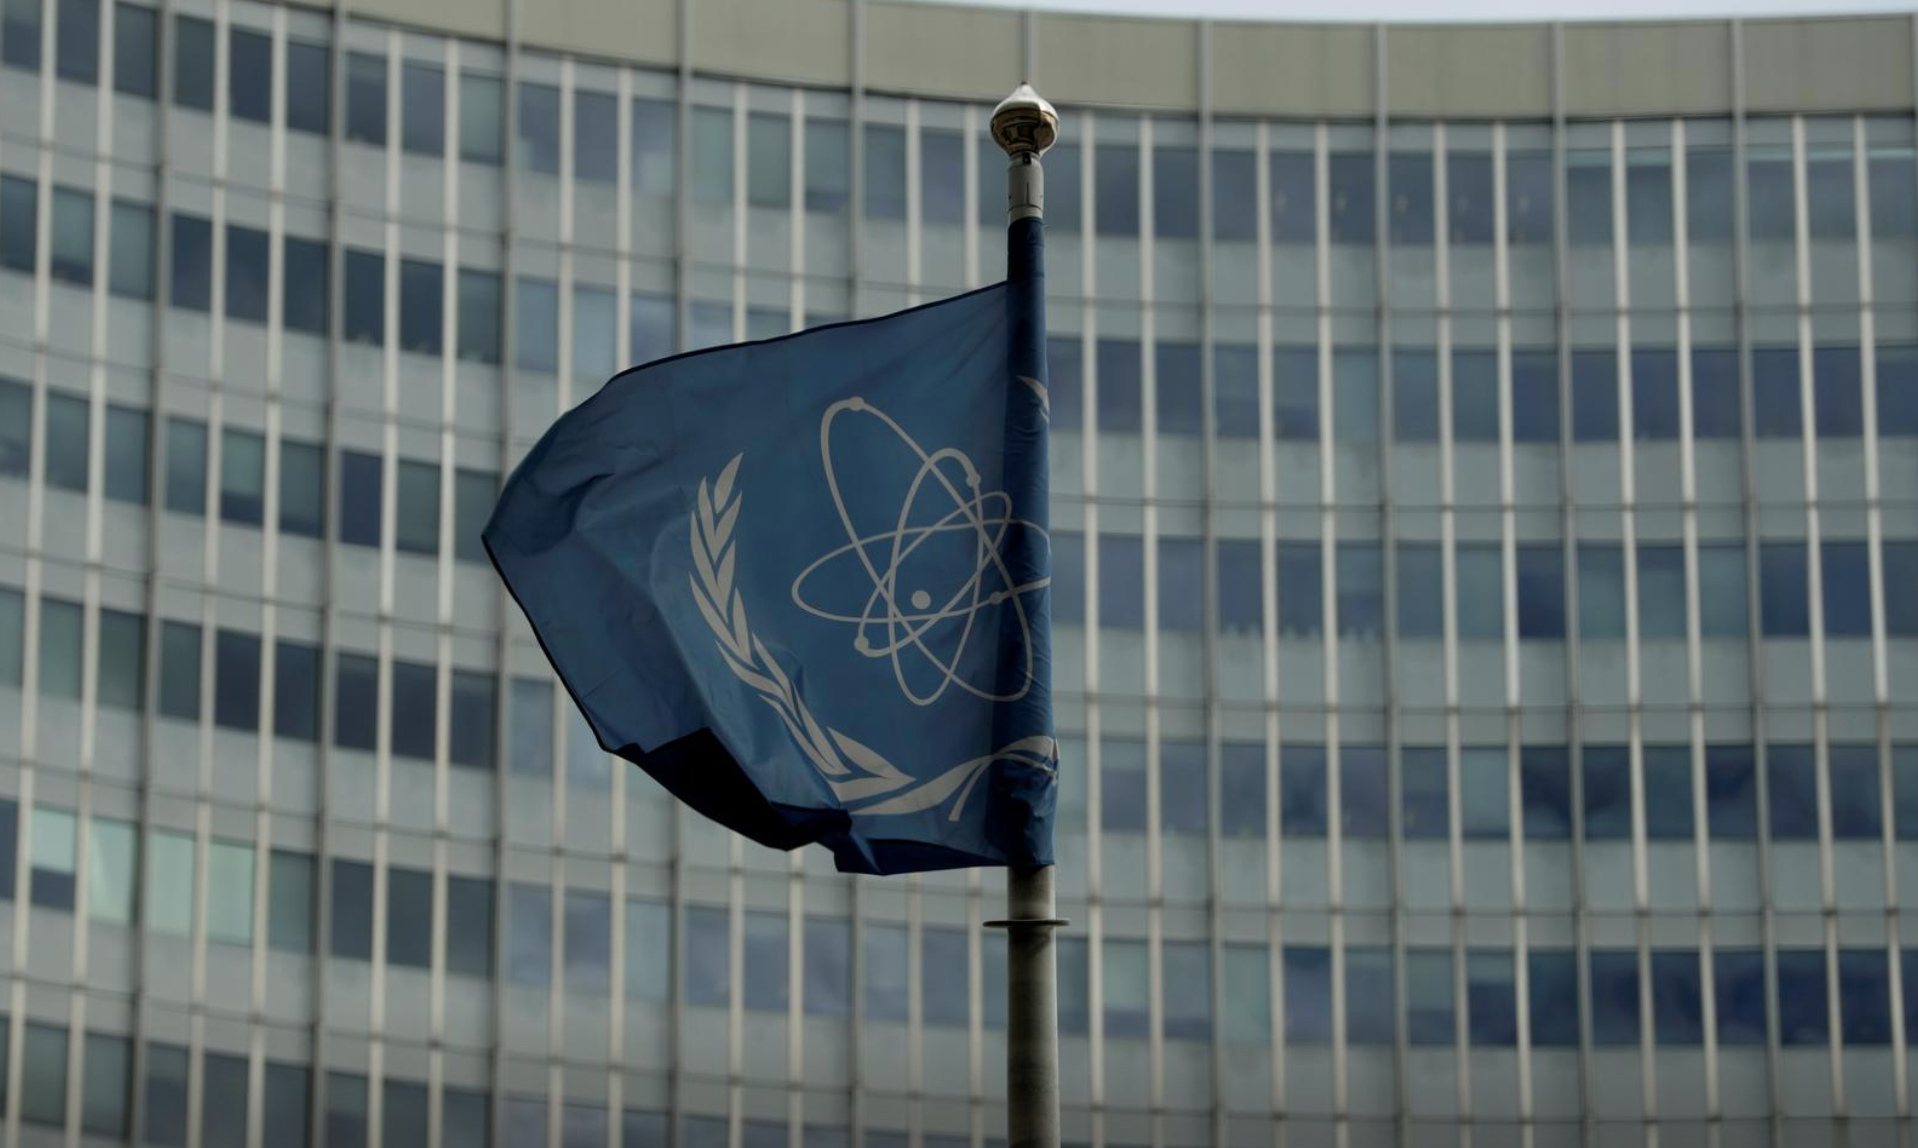 UN inspectors warns World over new radioactive traces found in Iran